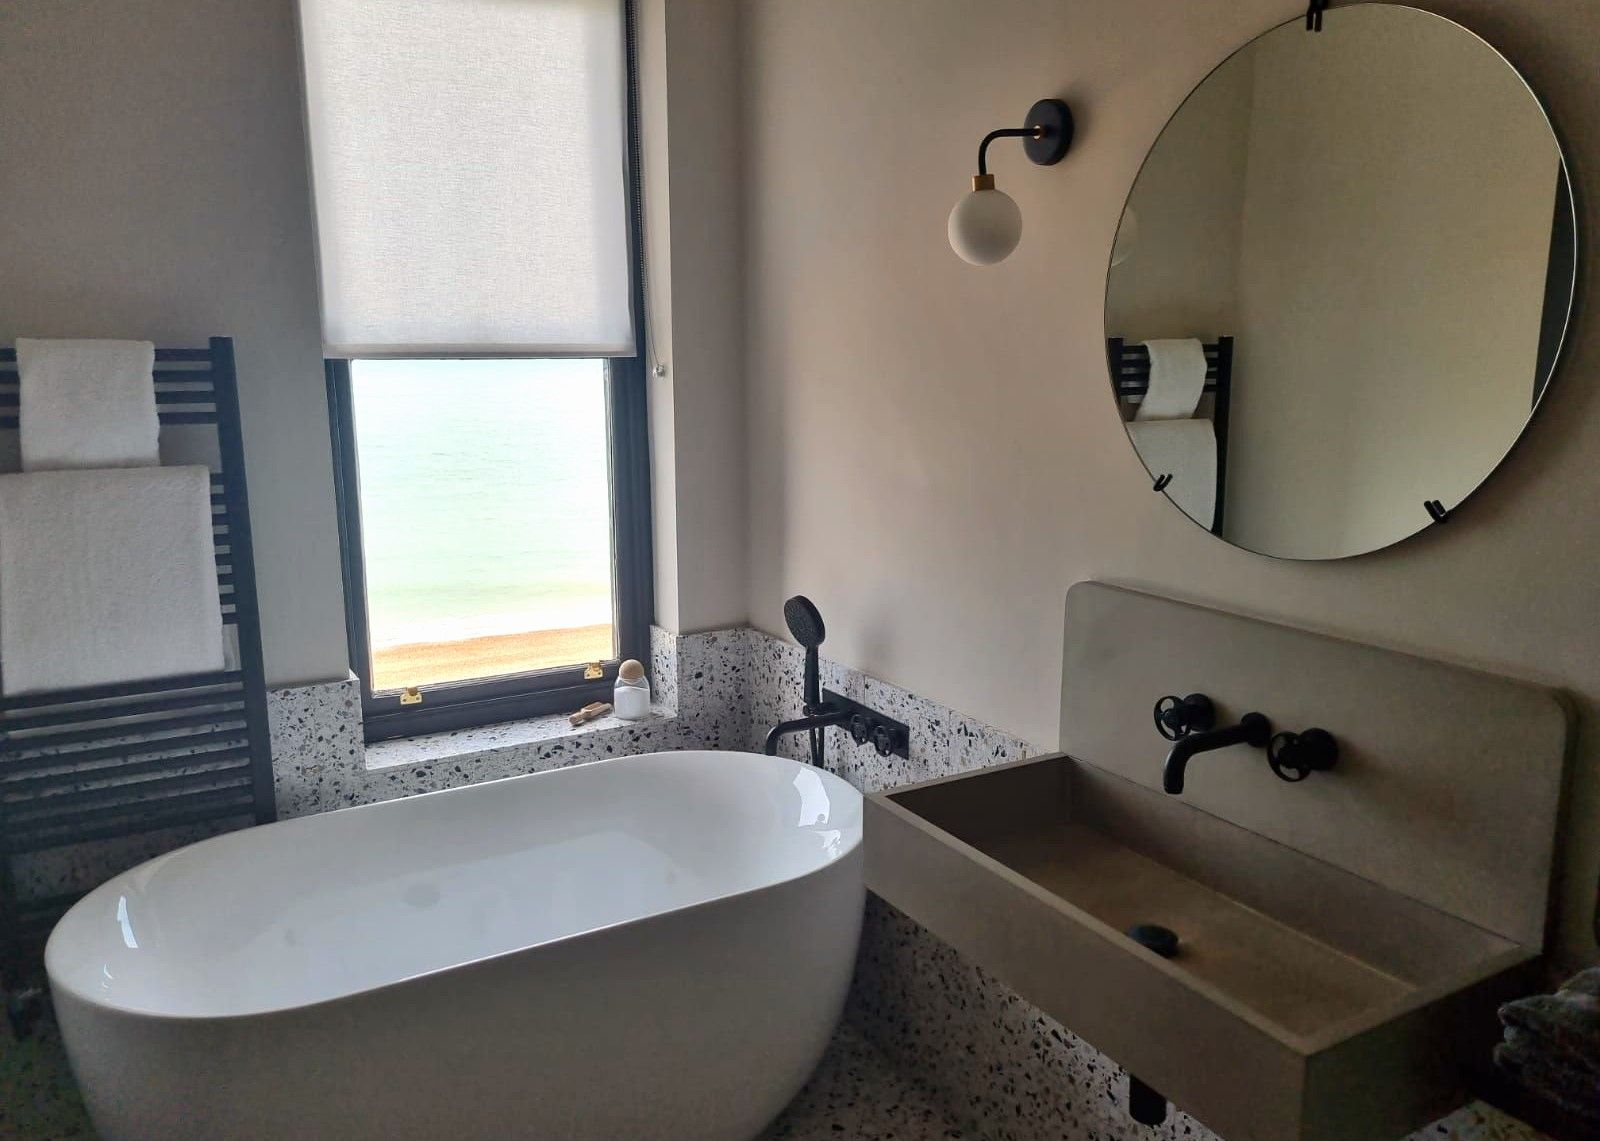 the port hotel bathroom, bath tub with window view, mirror, sink and towels